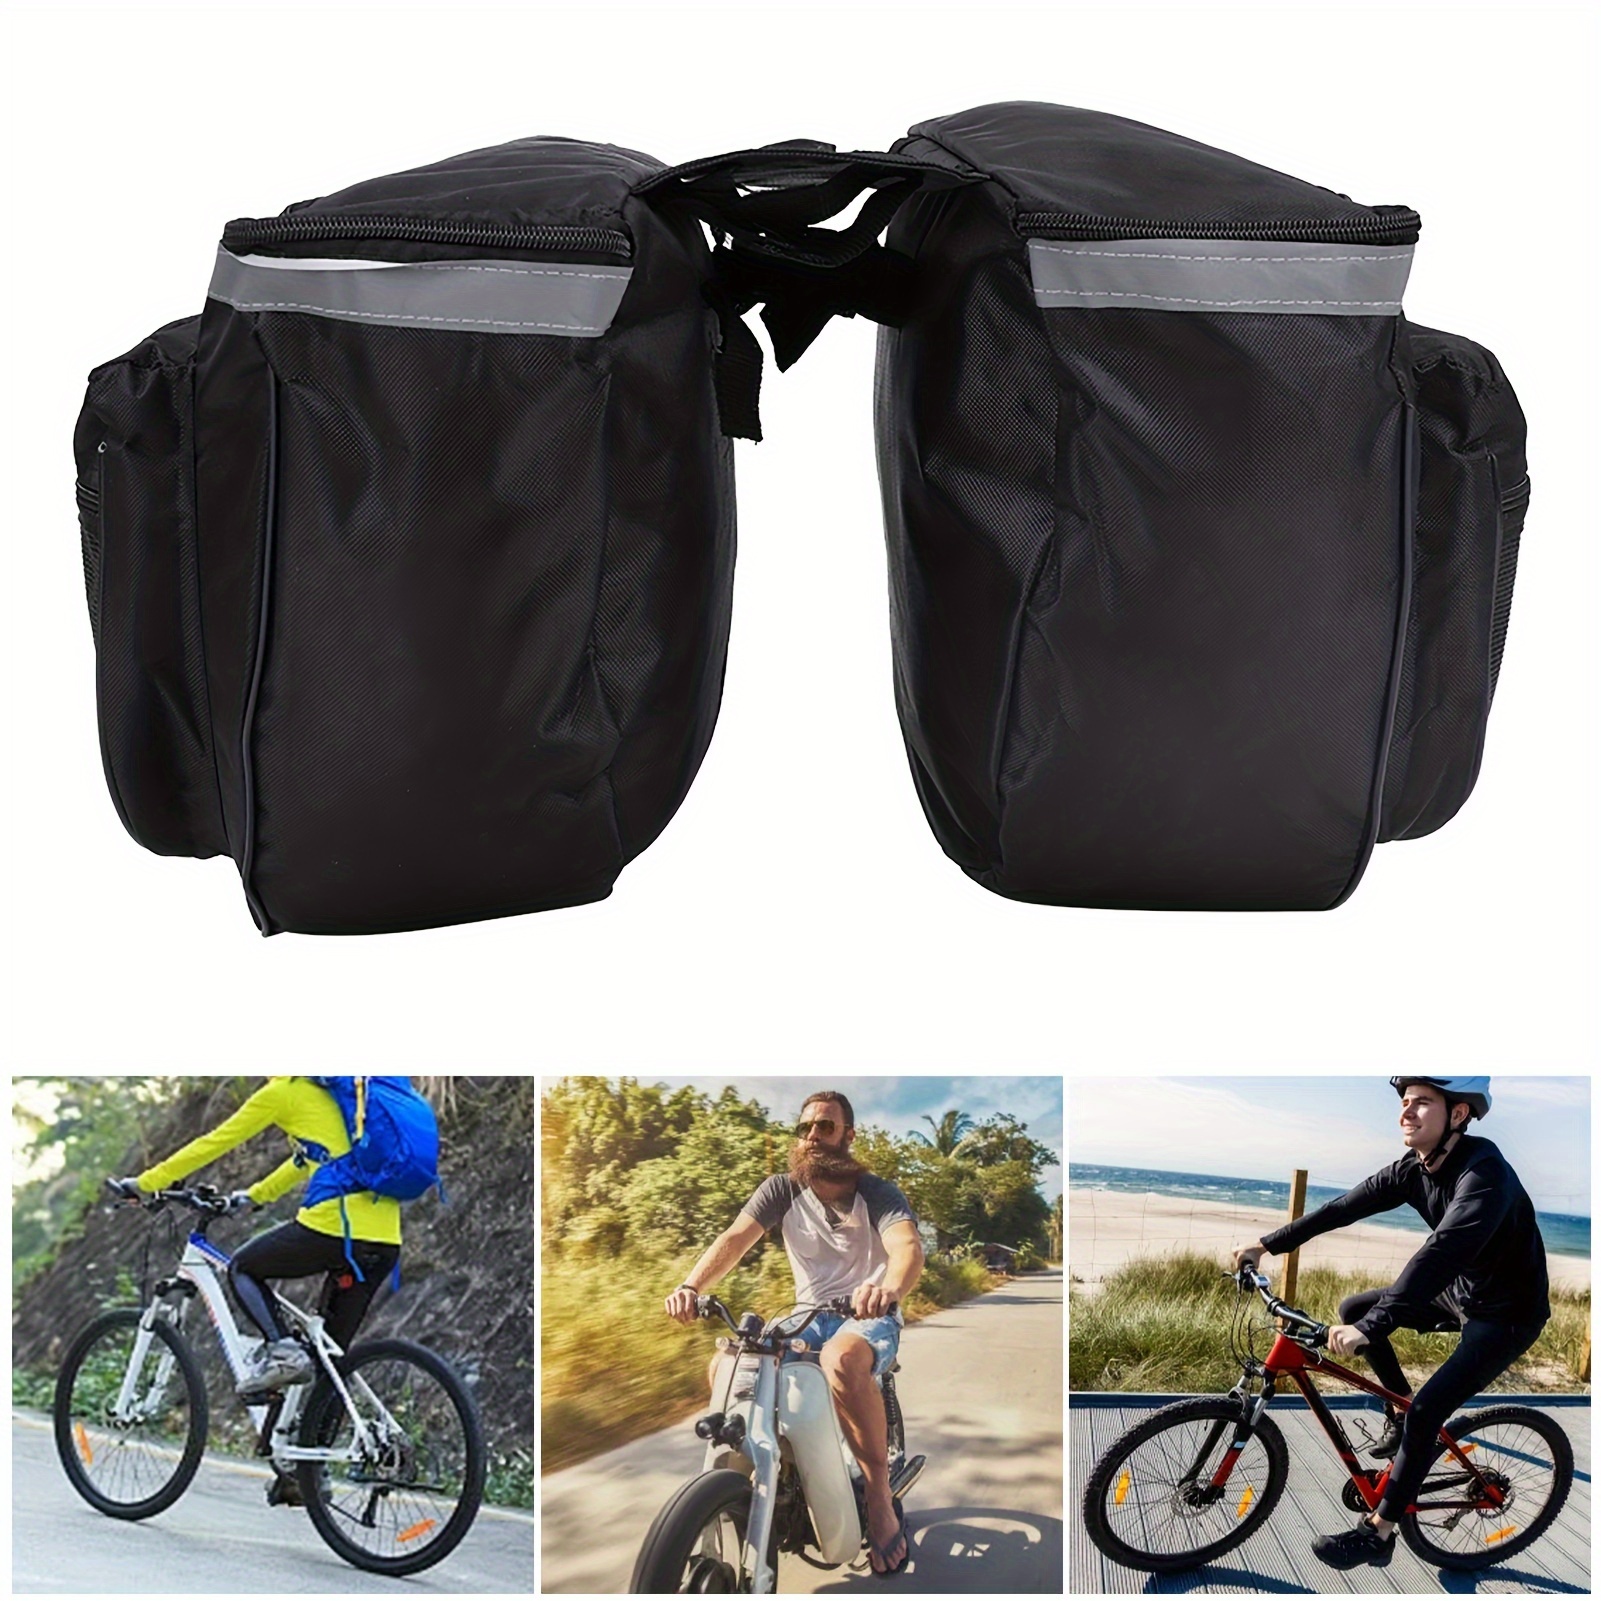 

25l Saddle Bags For Bicycle, Bike Rear Carrier Bag With Reflective Trim, Bike Panniers With Adjustable Hooks, Waterproof Mountain Road Bike Rack Rear Seat Tail Carrier Trunk Double Pannier Bag (black)